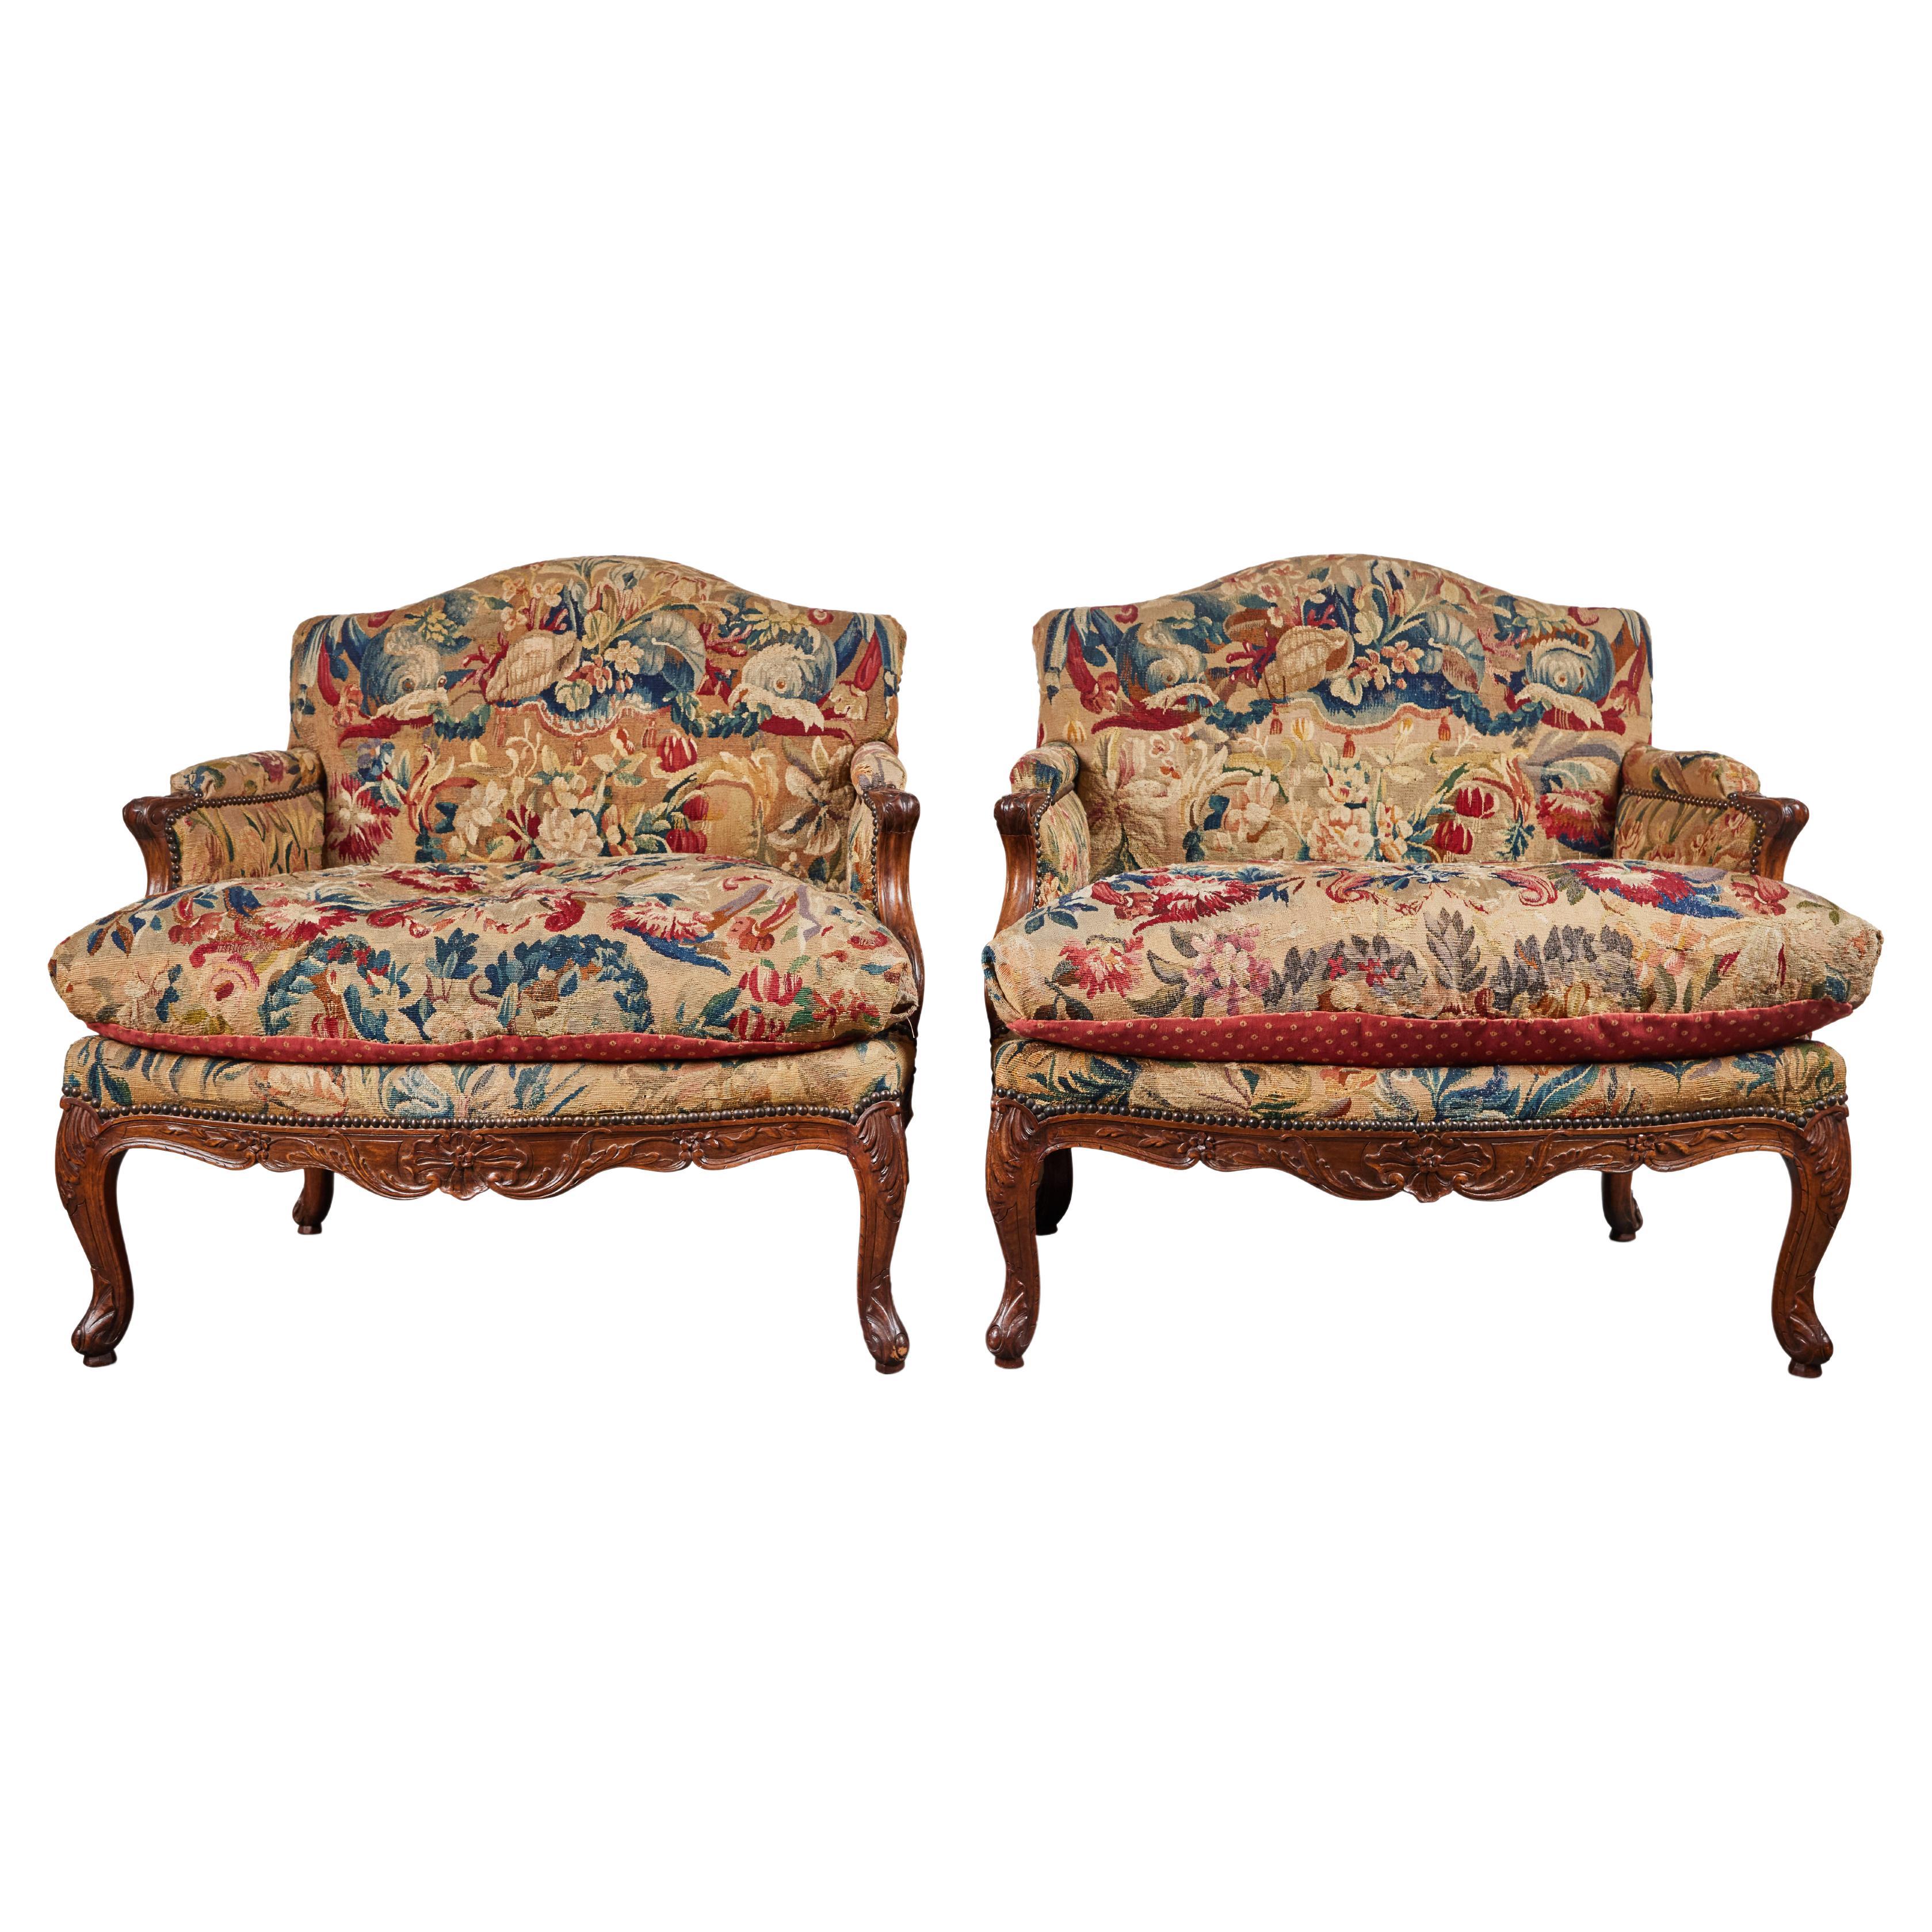 Two, c. 1800 Marquis Chairs